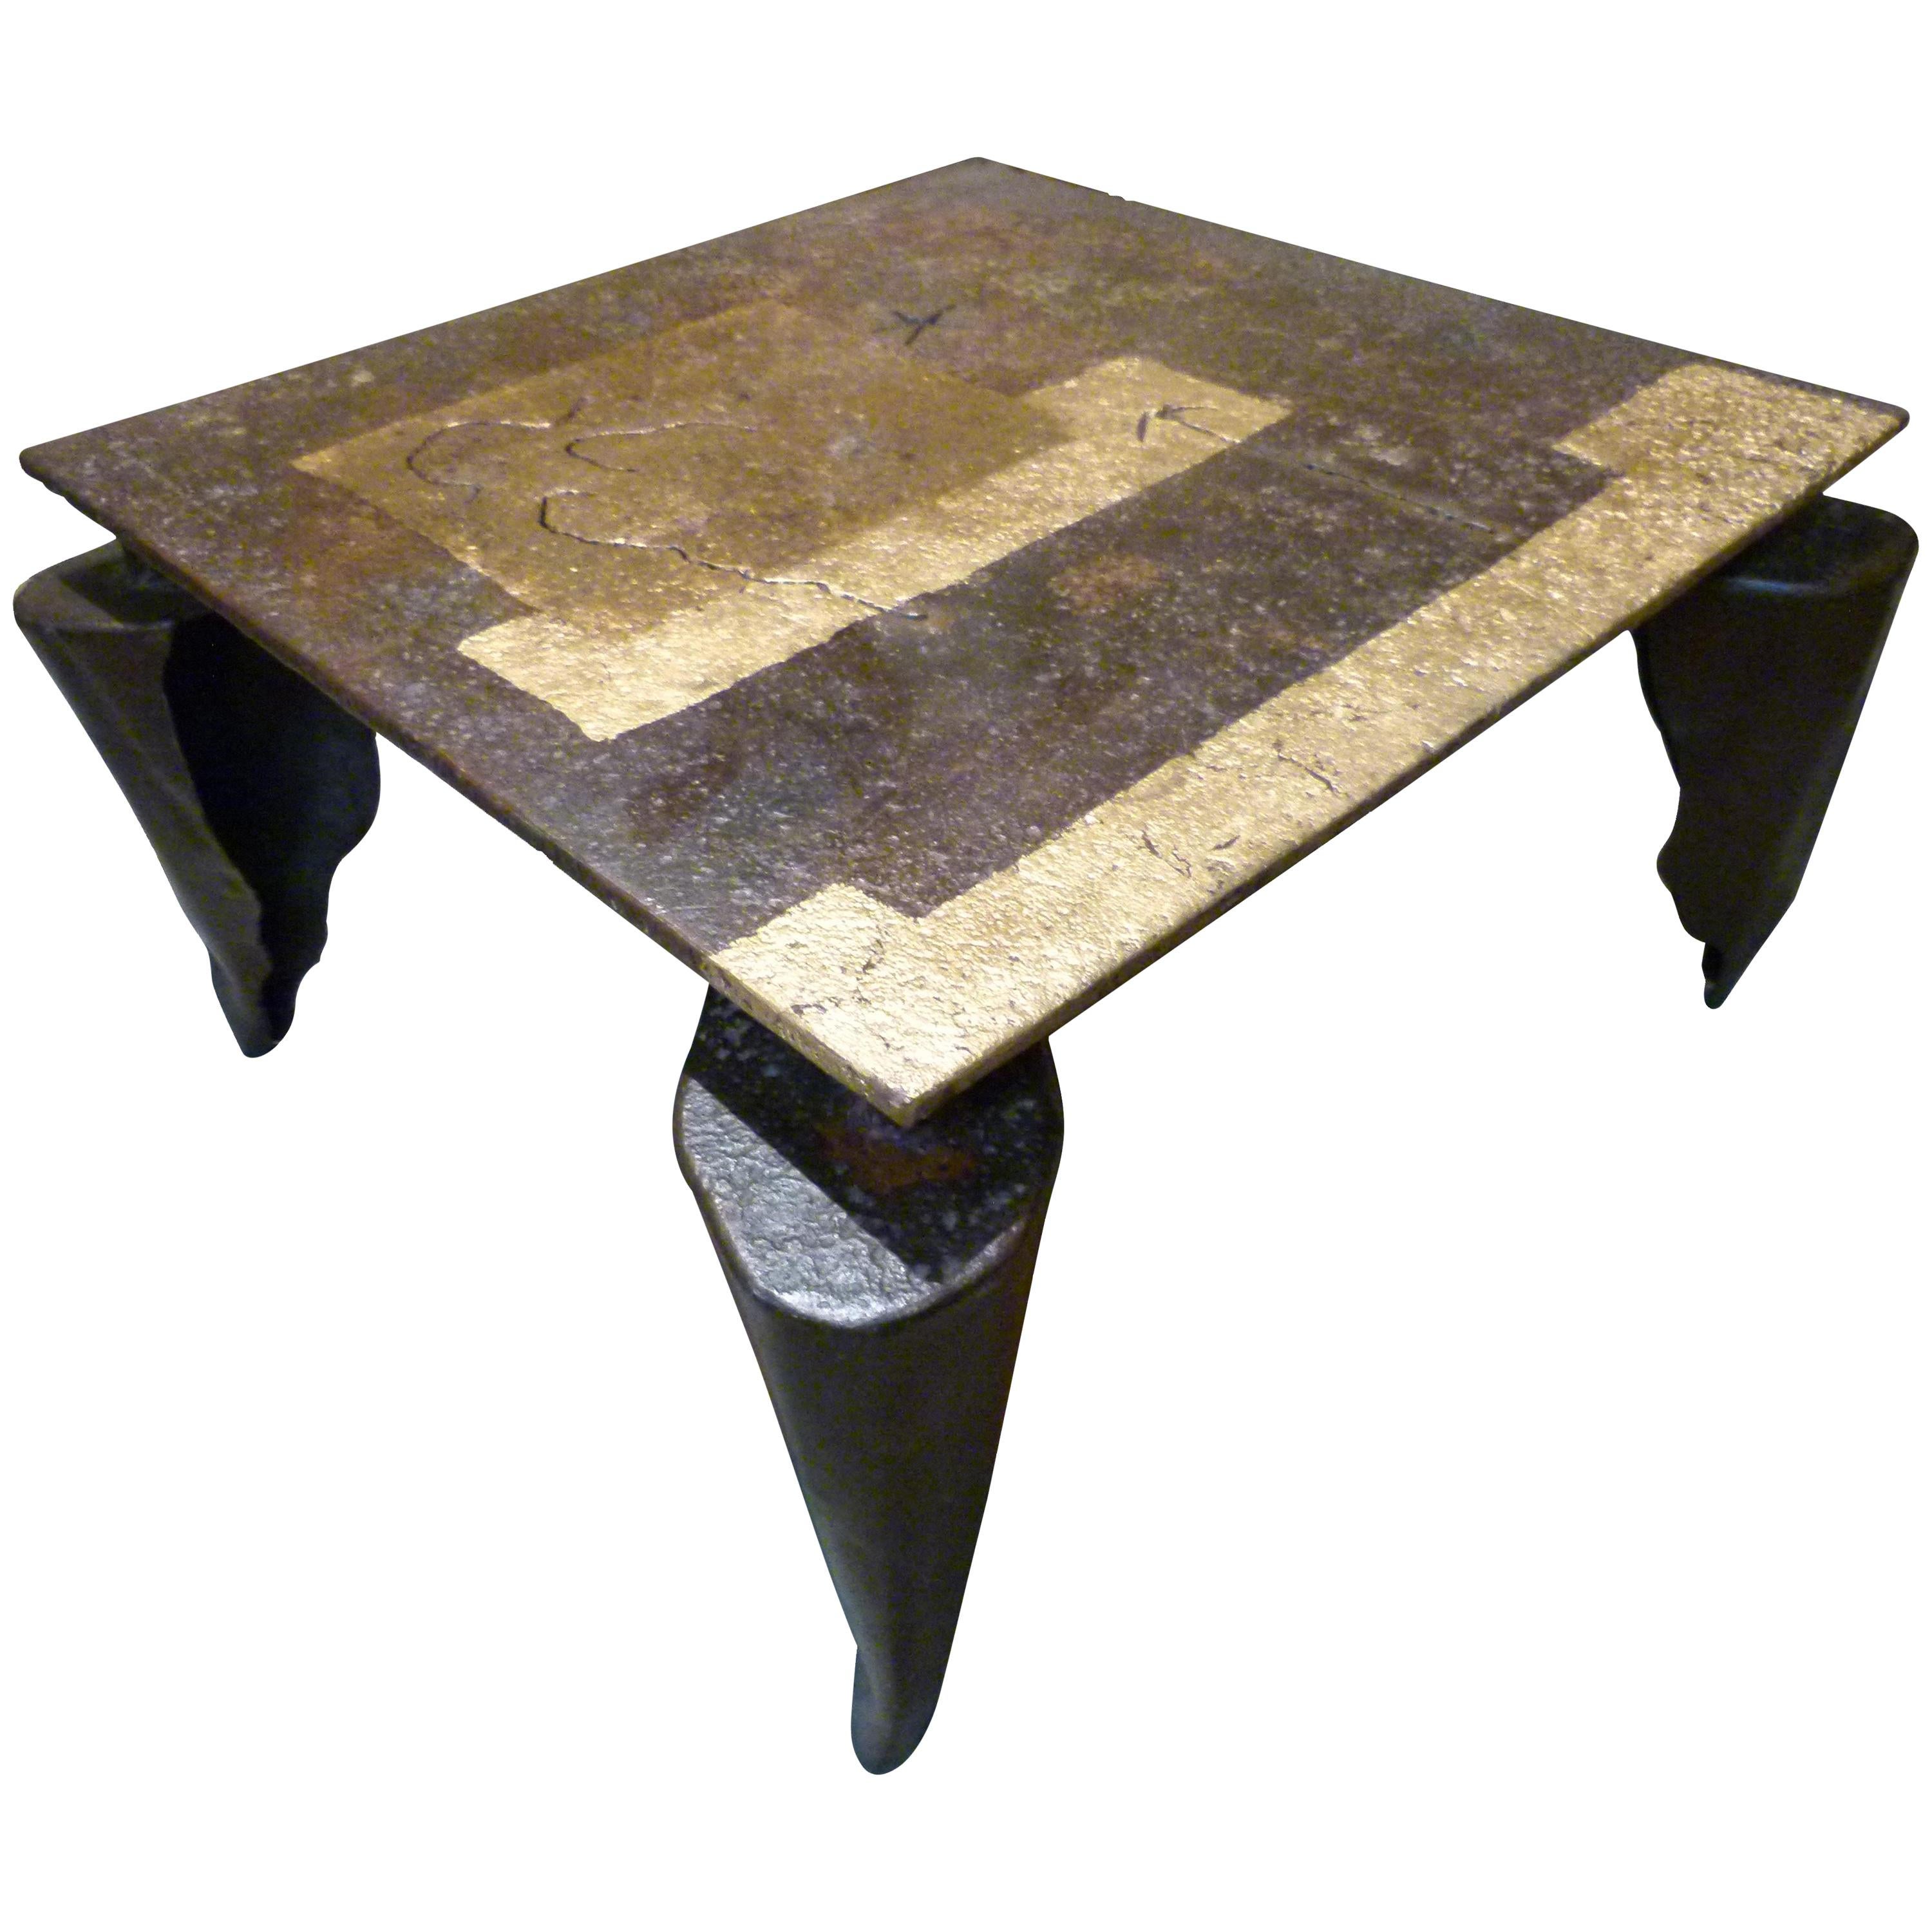 Jean-Jaques Argueyrolles  Contemporary  Iron and Gold Leaf French Table  